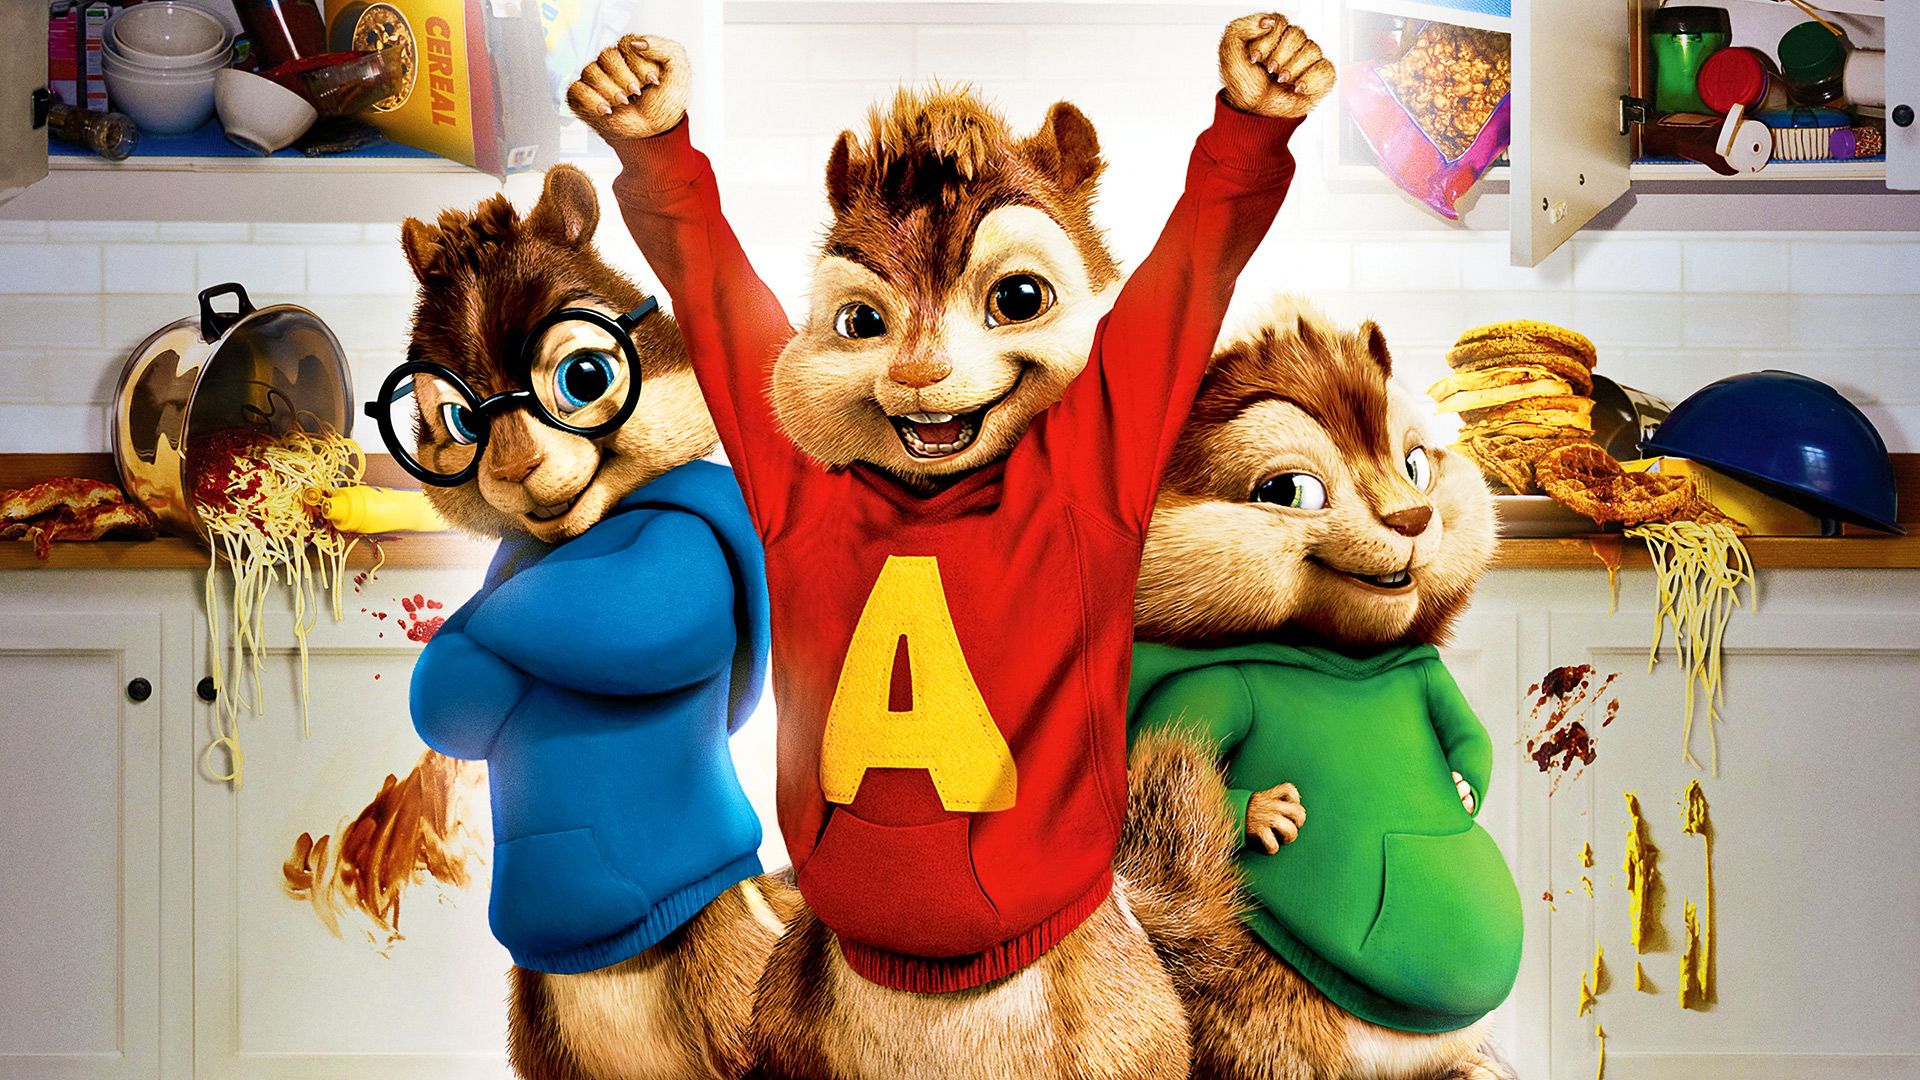 Alvin and the Chipmunks background